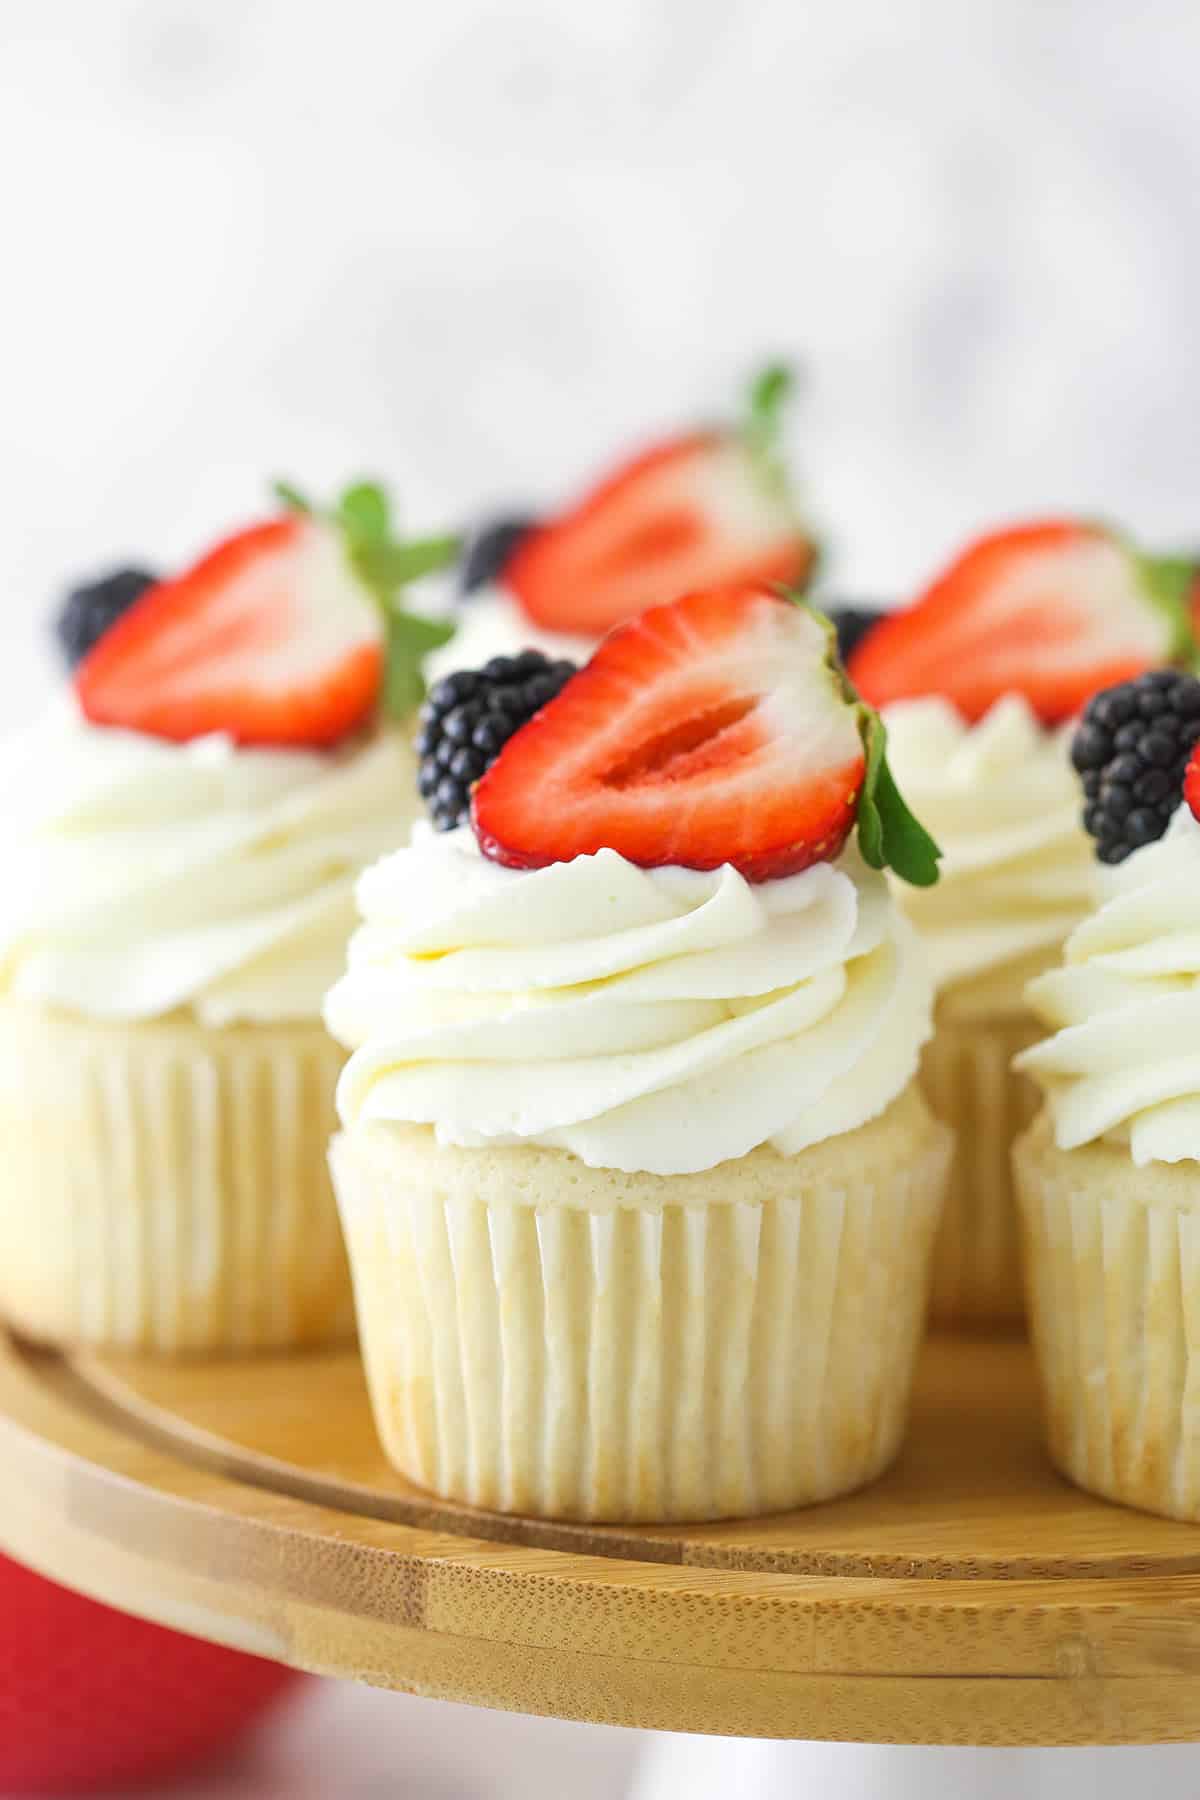 Cupcakes topped with whipped cream frosting and fresh berries.